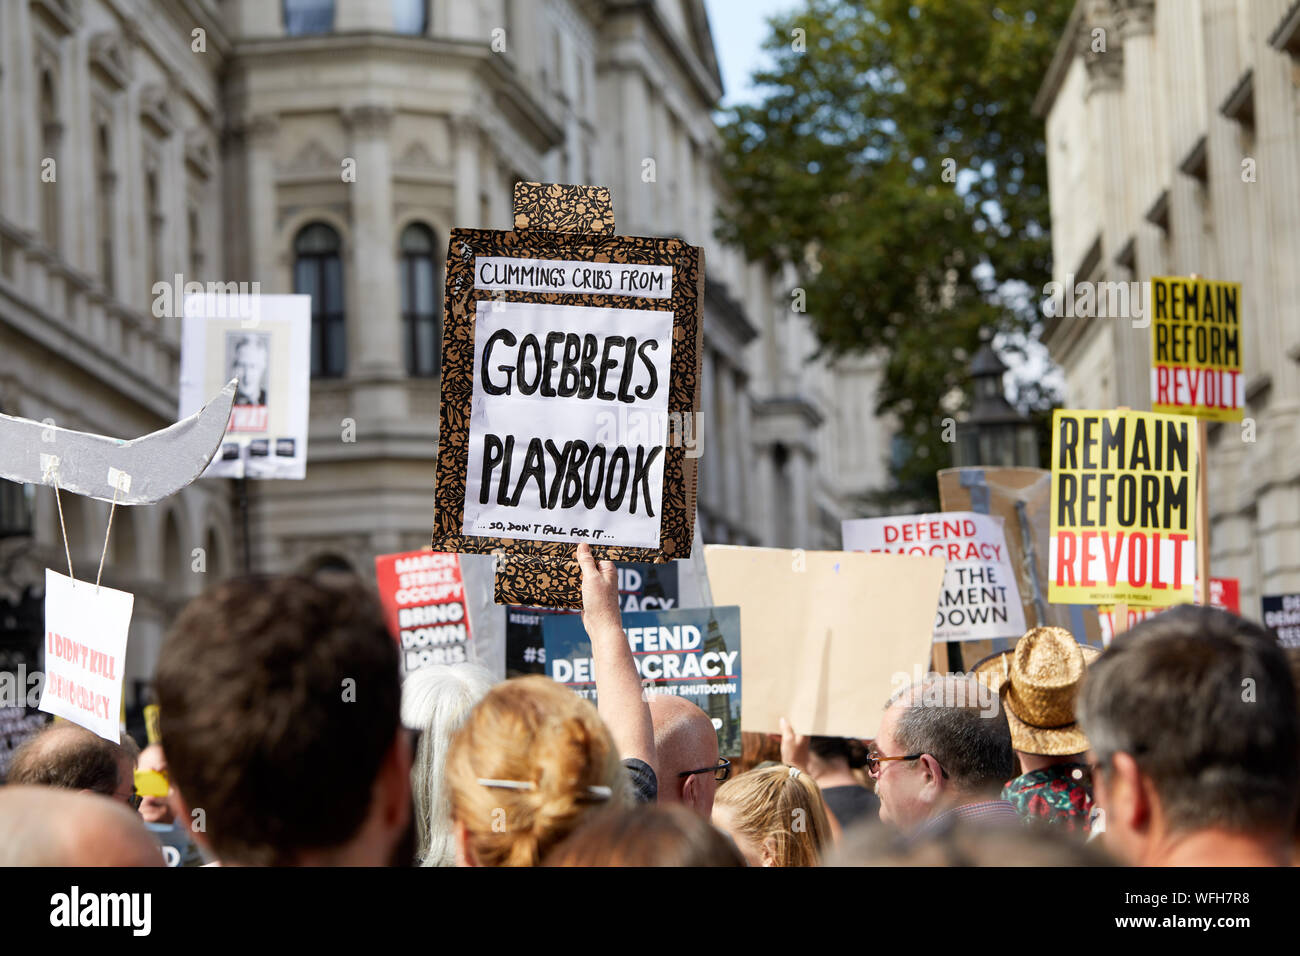 London, U.K. - August 31, 2019: Protestors outside Downing Street against Boris Johnson's decision to suspend Parliament in the run-up to Brexit. Stock Photo